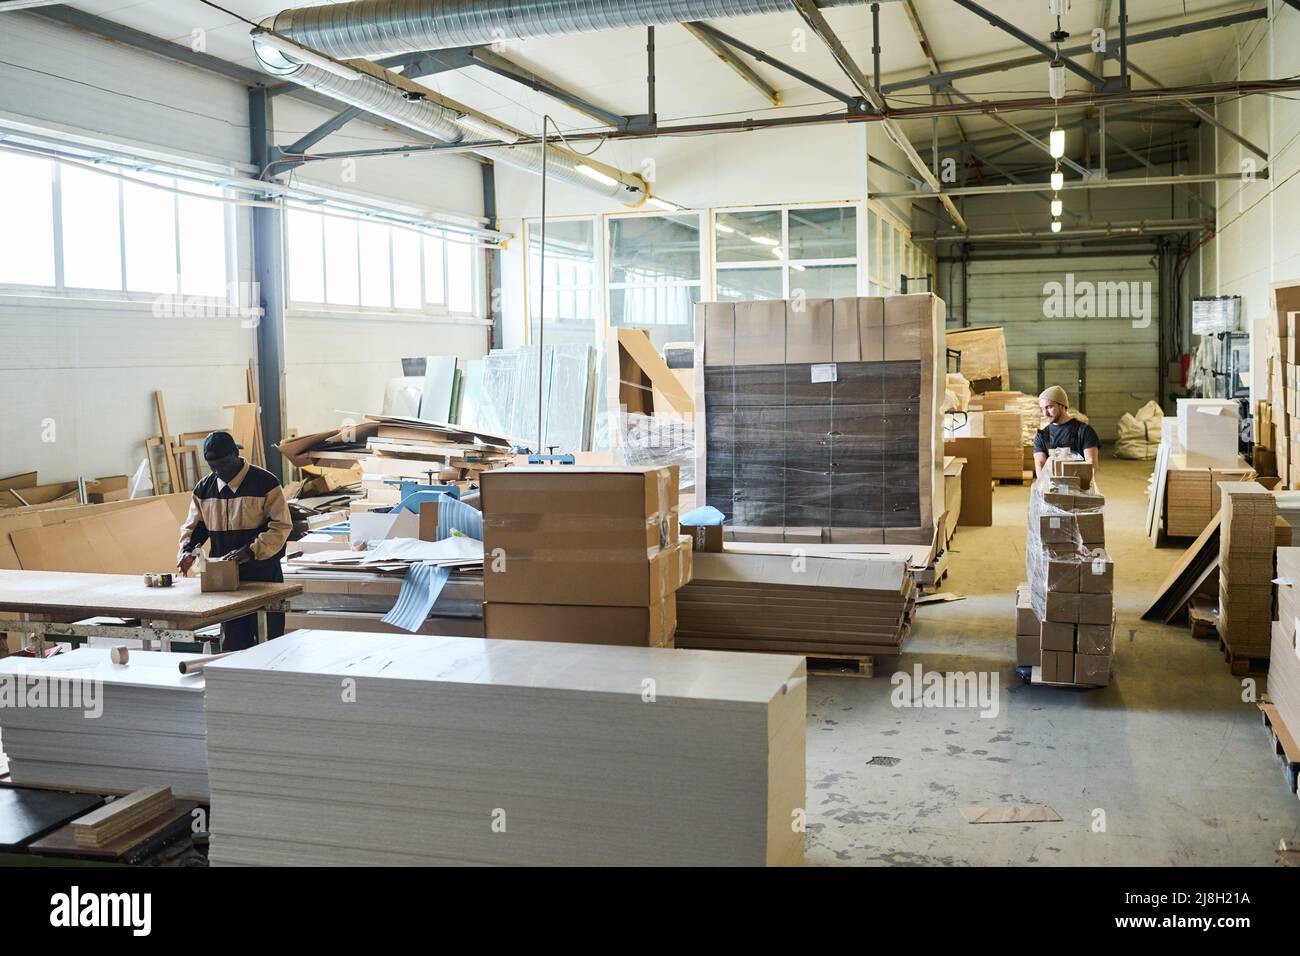 Manual workers working with freight in cardboard boxes at distribution warehouse for further export Stock Photo